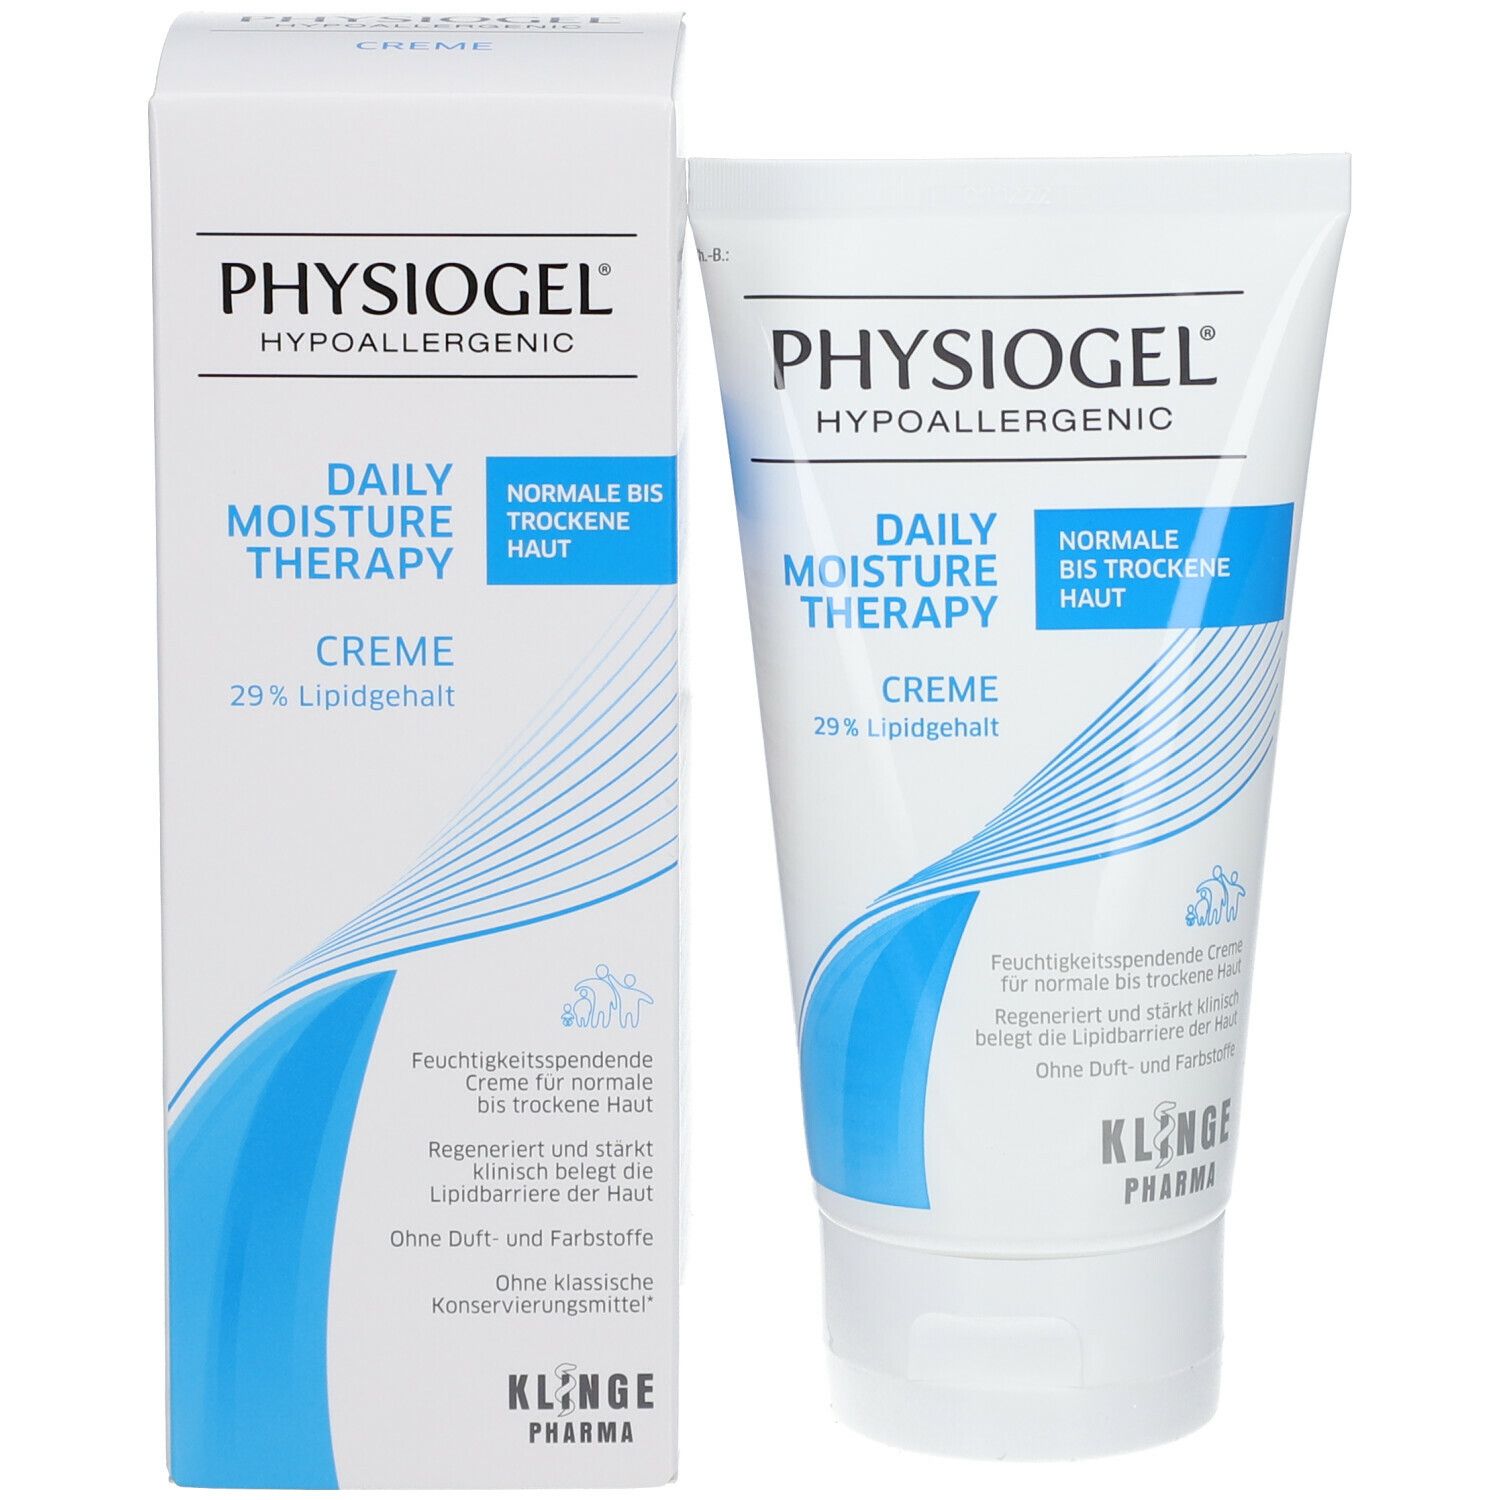 PHYSIOGEL® Daily Moisture Therapy Creme 150ml  - normale bis trockene Haut